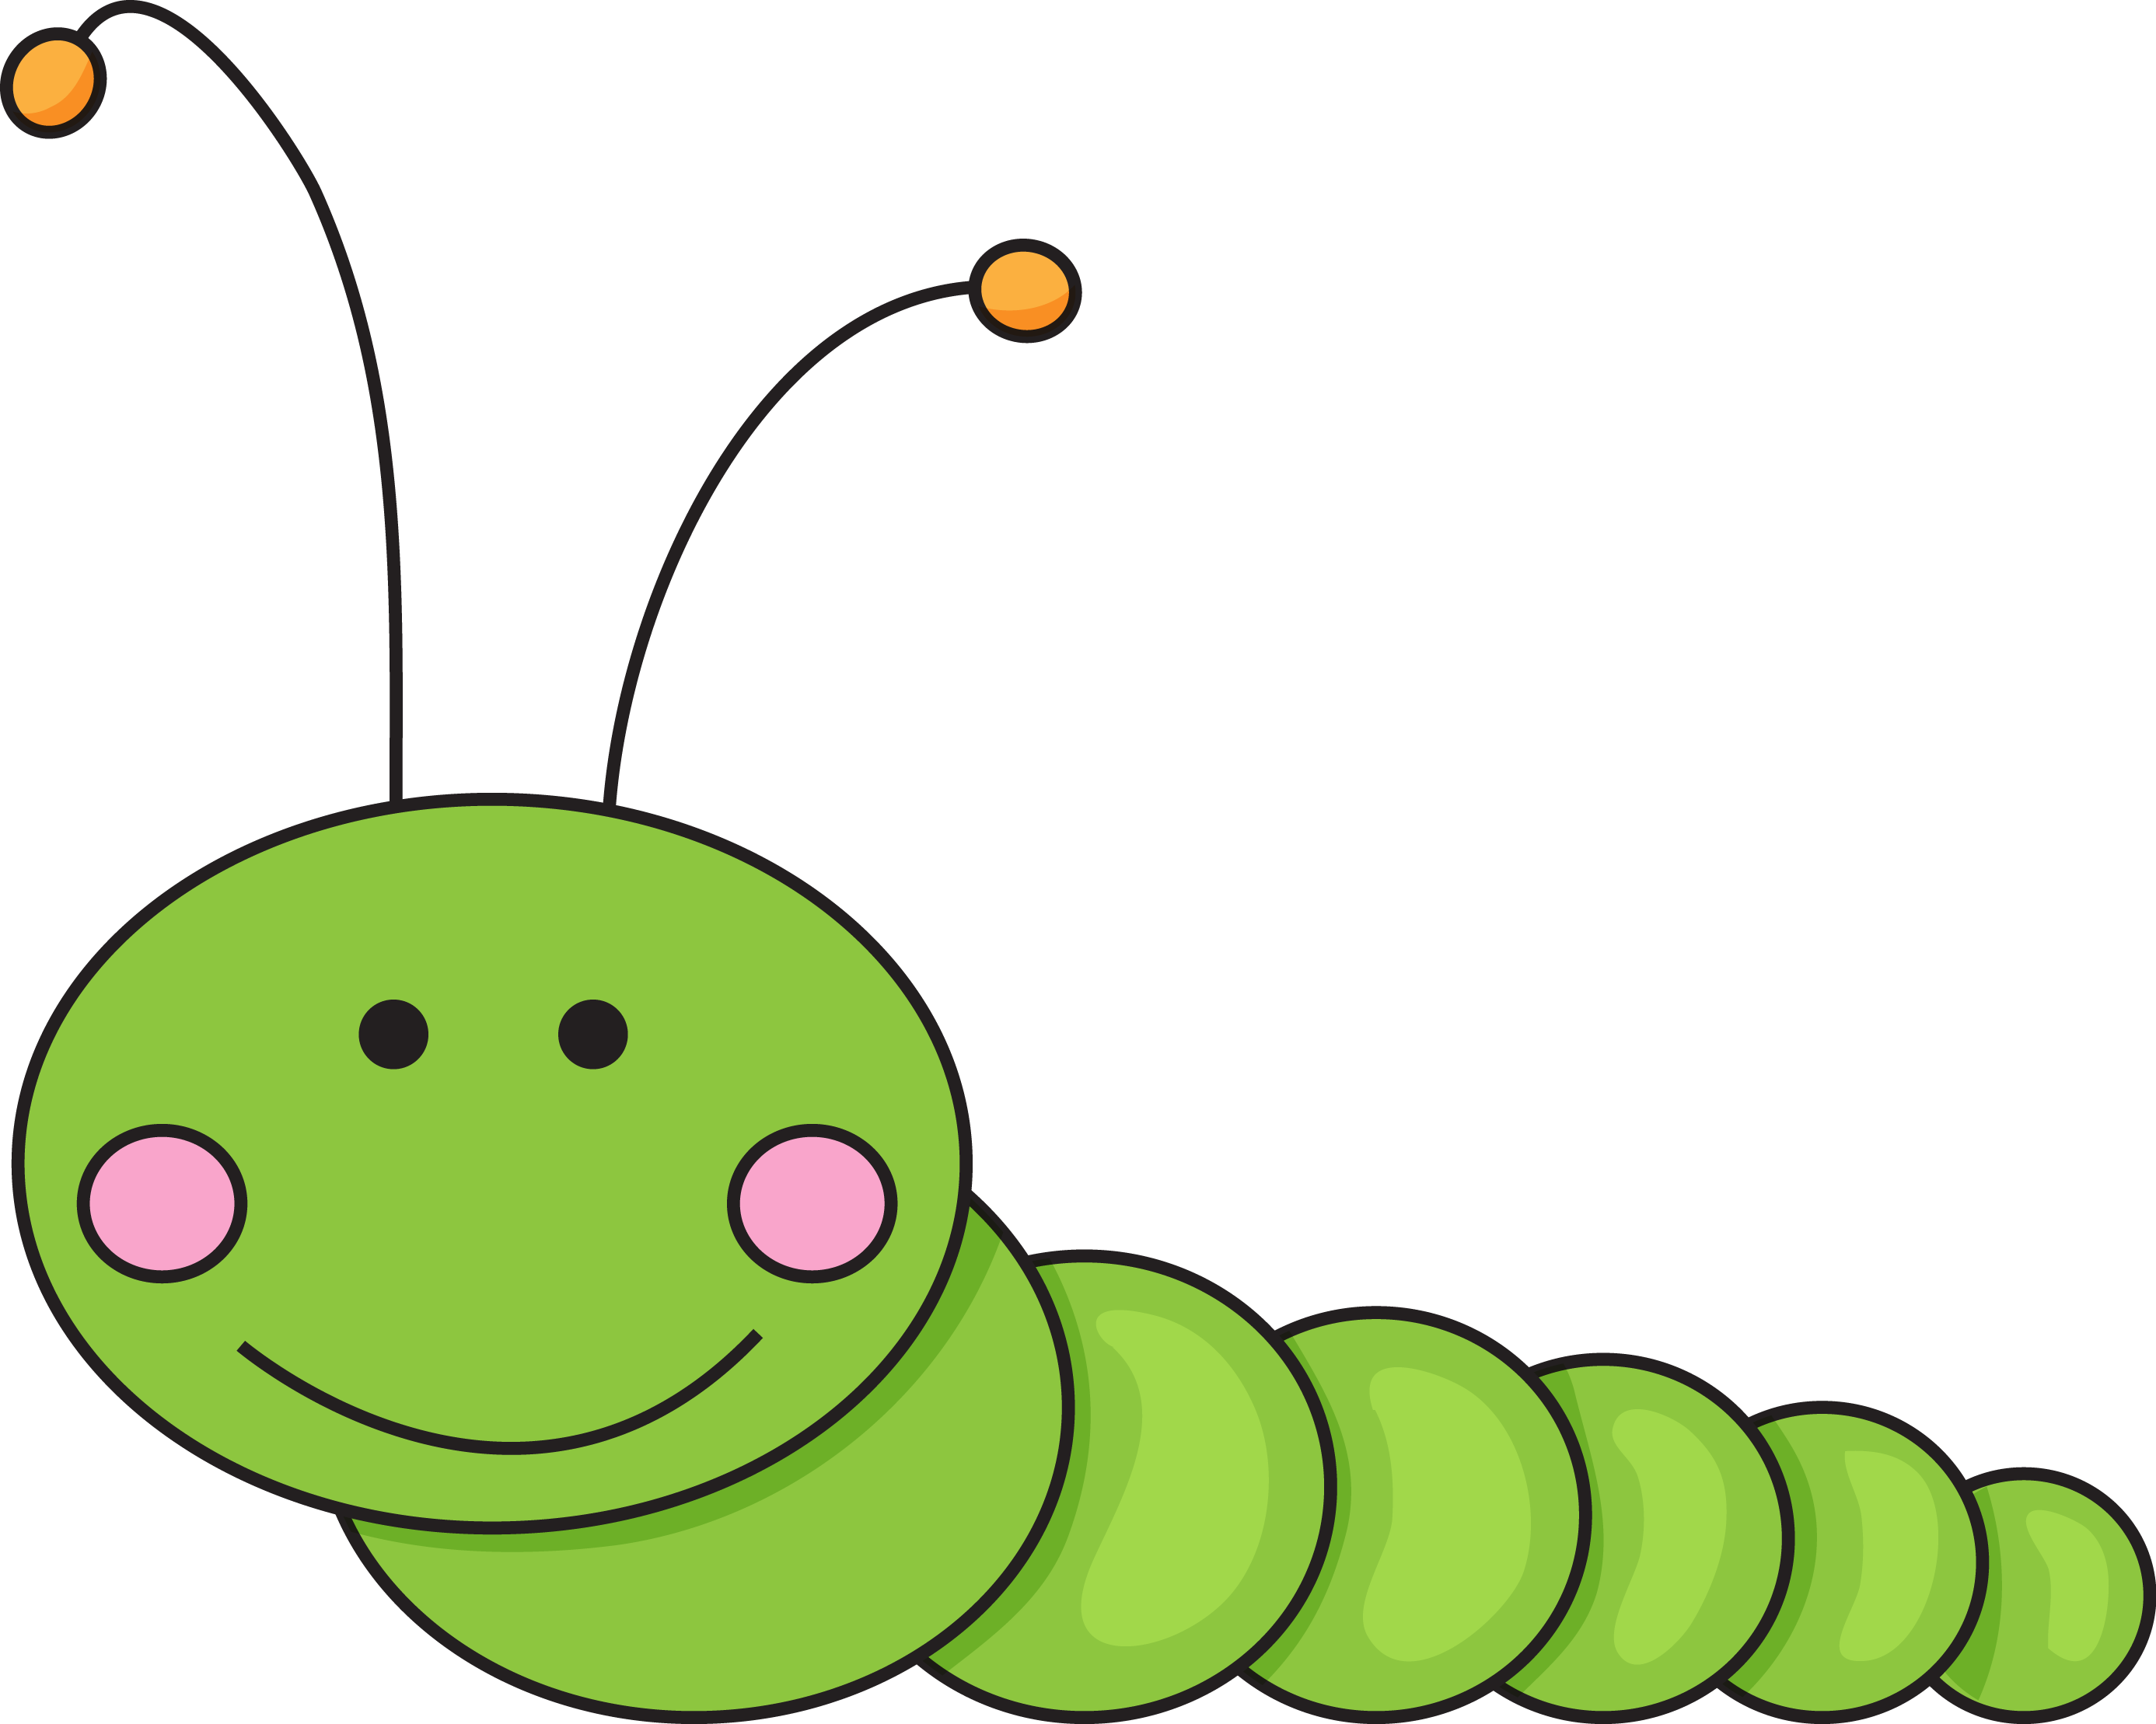 Worm clipart caterpillar baby. Hungry pencil and in